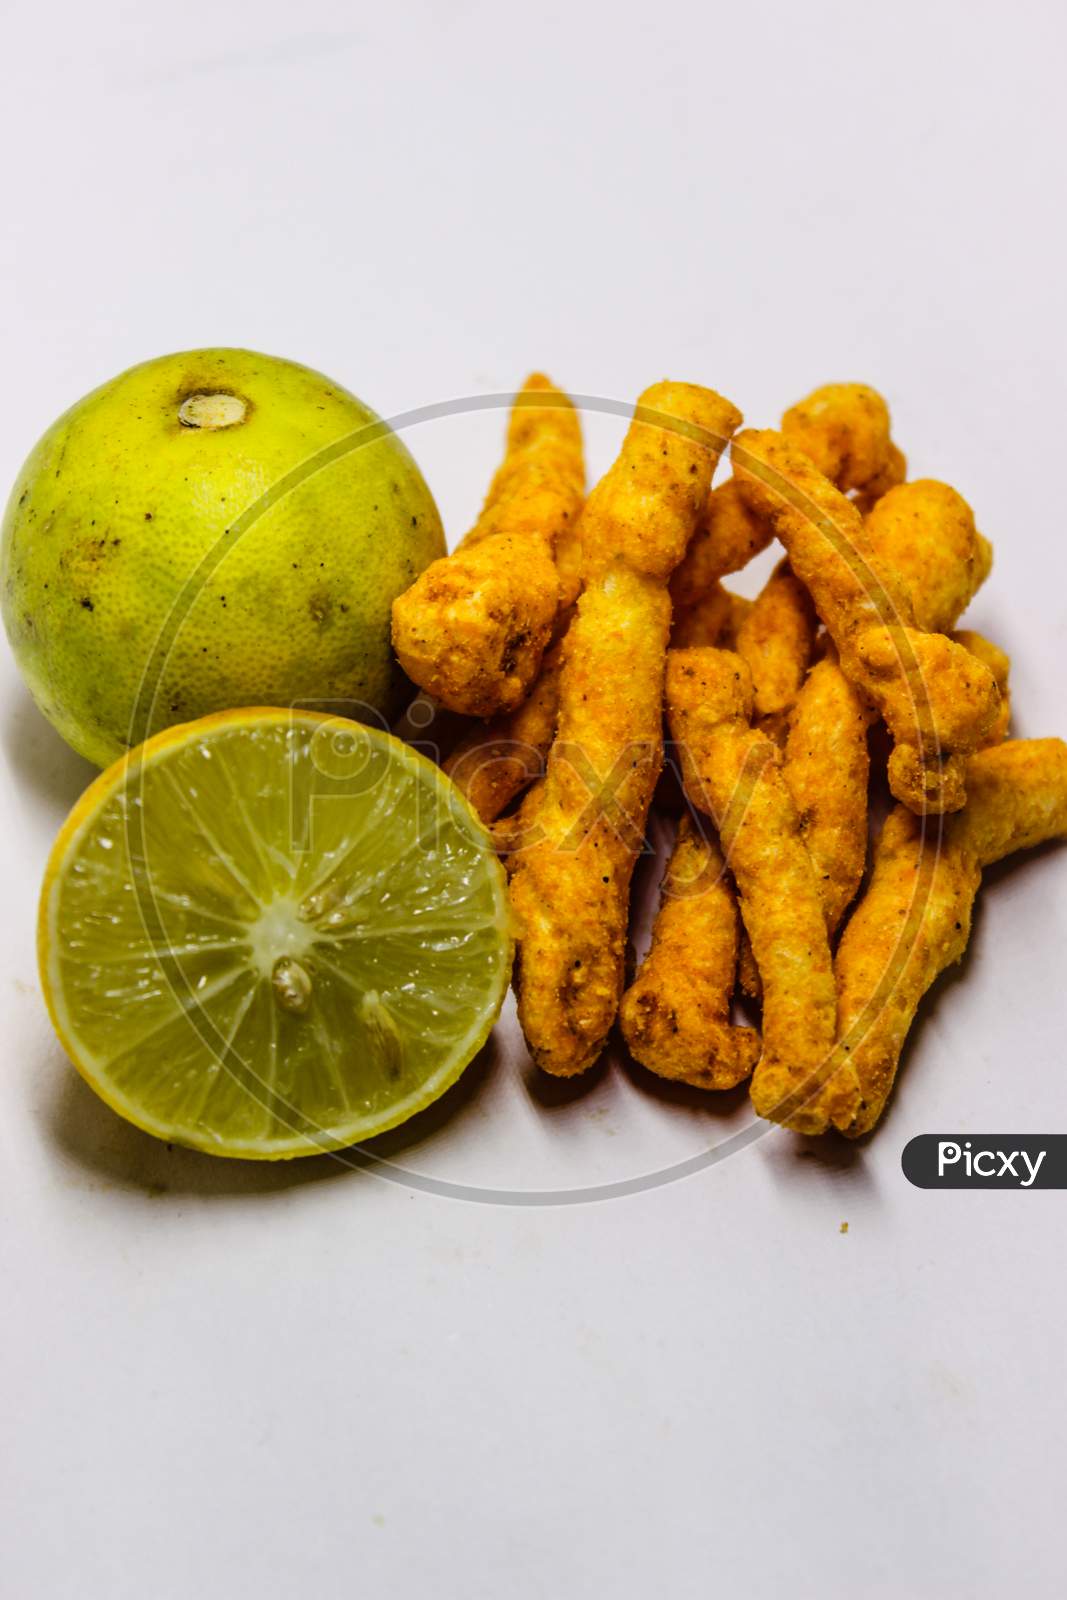 Turmeric Roots And Lemon Over an Isolated White Background